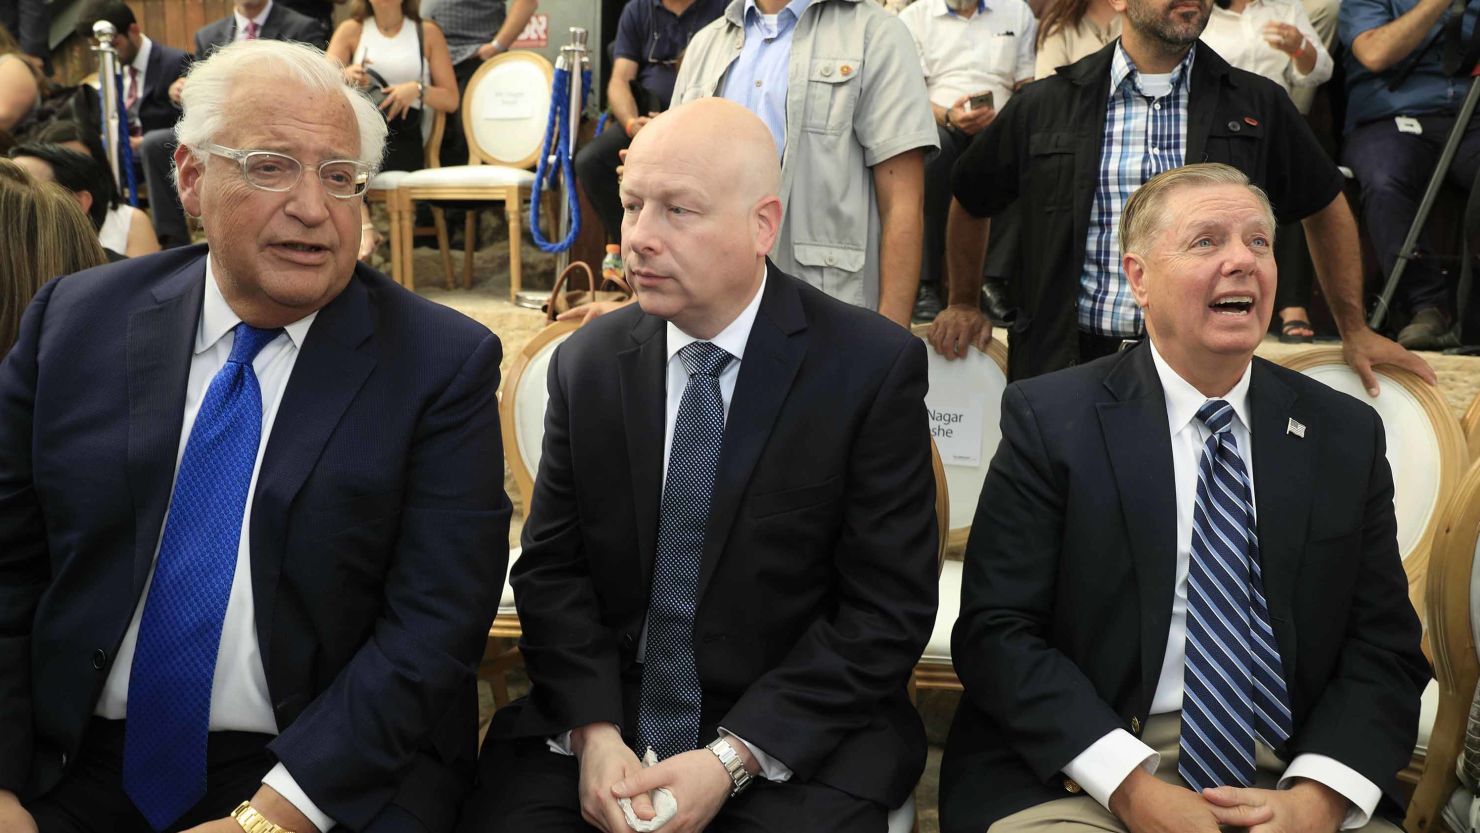 From left to right, US Ambassador to Israel David Friedman, Middle East envoy Jason Greenblatt and US Senator Lindsey Graham at the opening of the site in East Jerusalem.